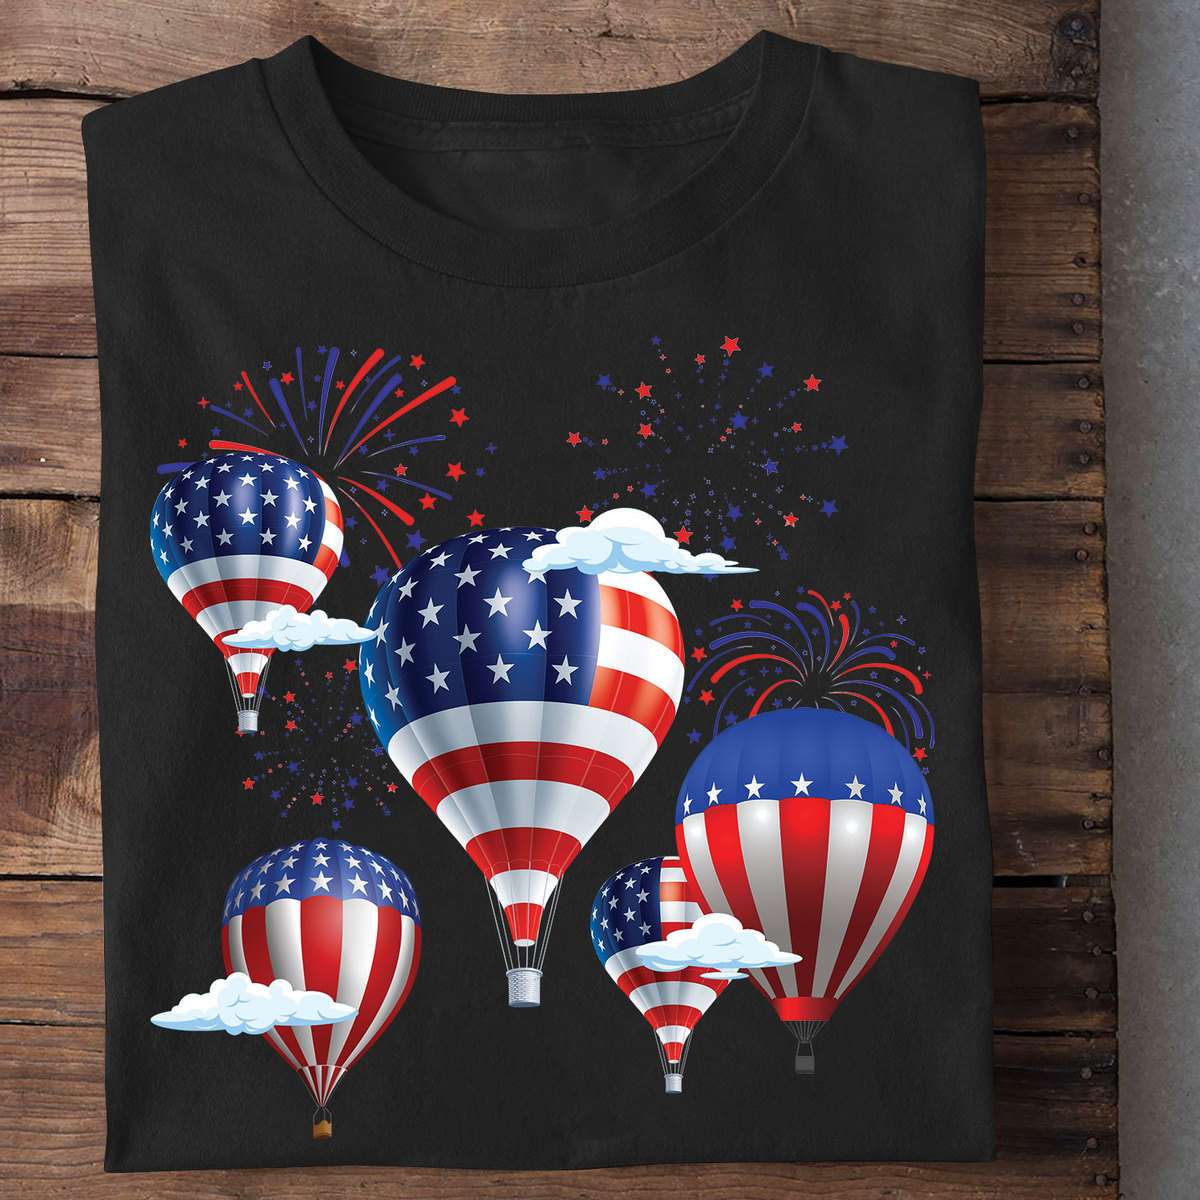 America balloon - Flying balloon, America independence day